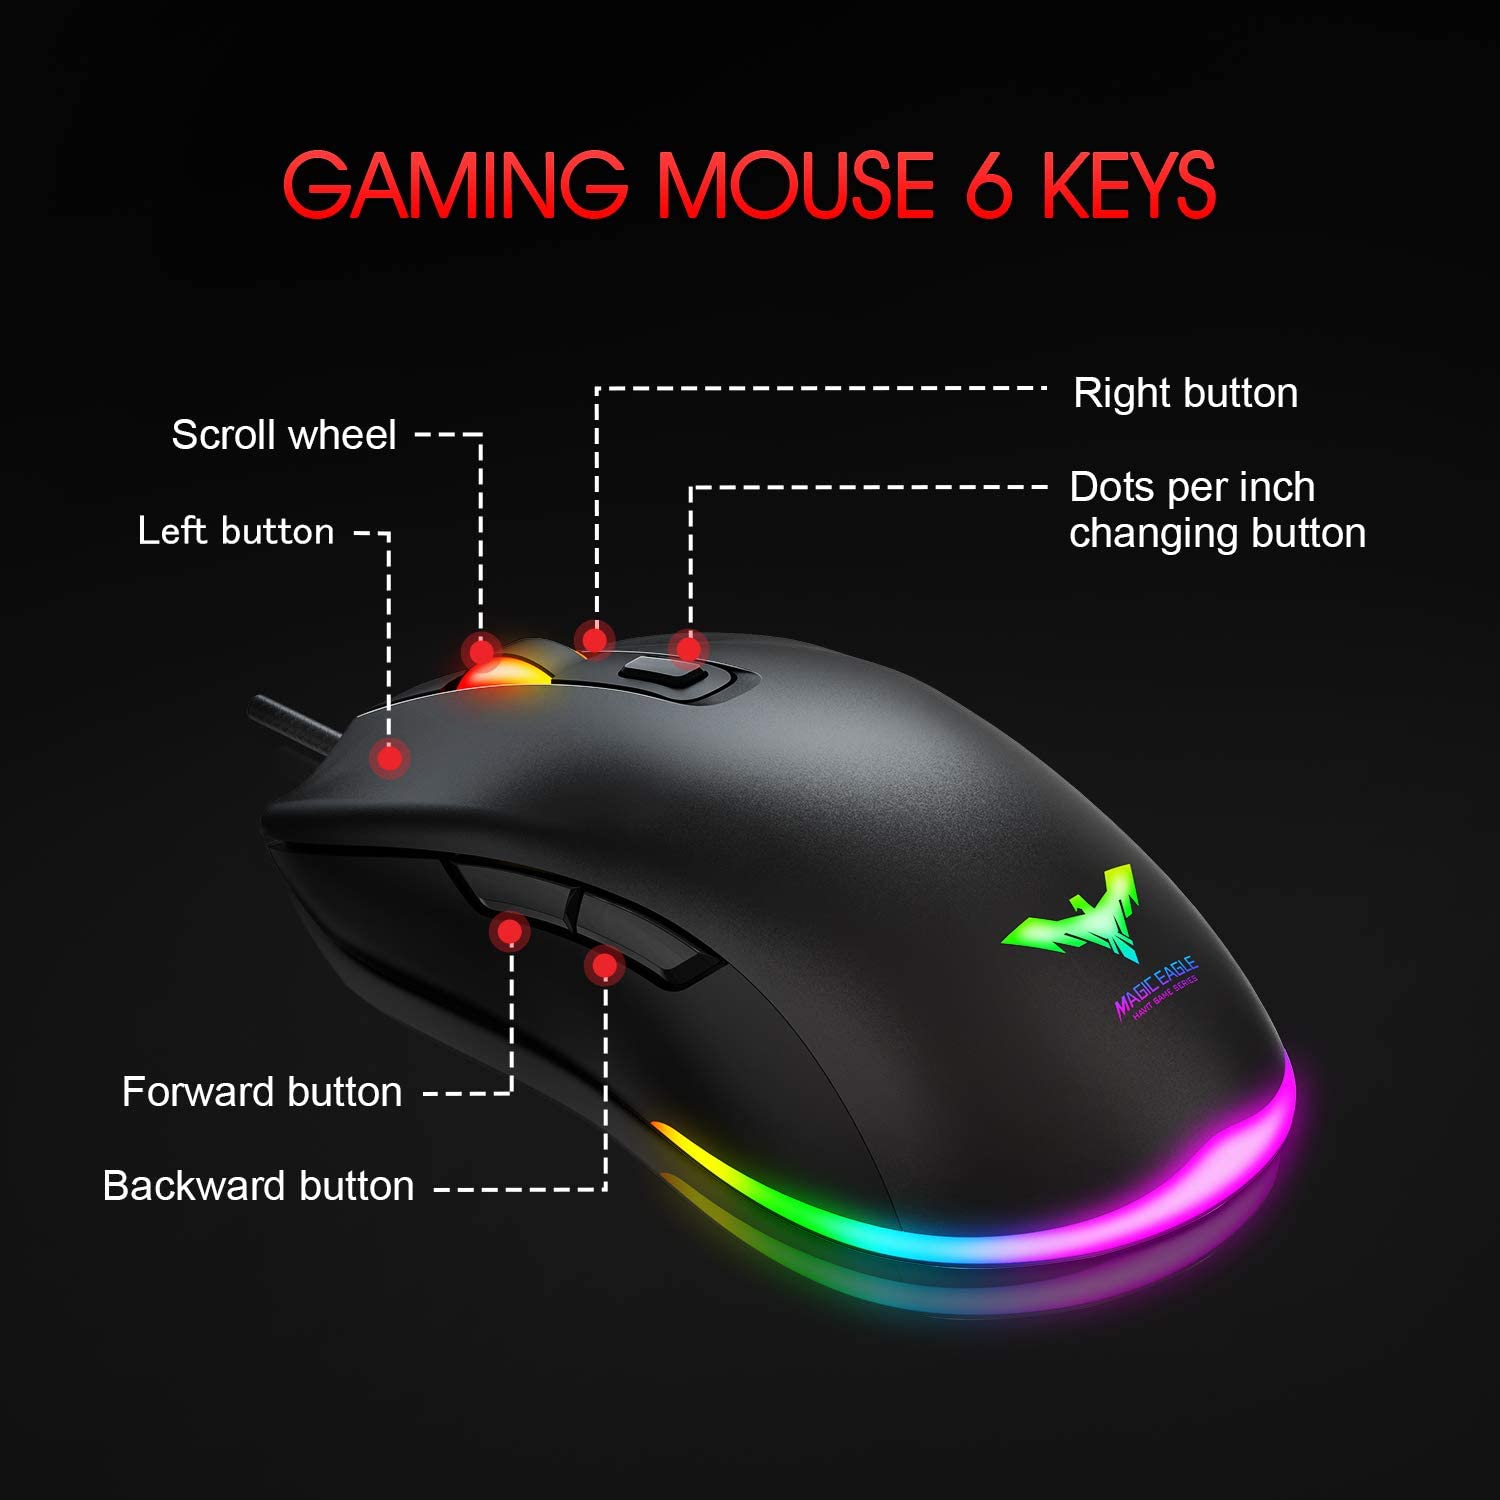 HAVIT KB486L Mechanical Keyboard Mouse & Mouse Pad Combo with 89 Keys Backlit Red Switch